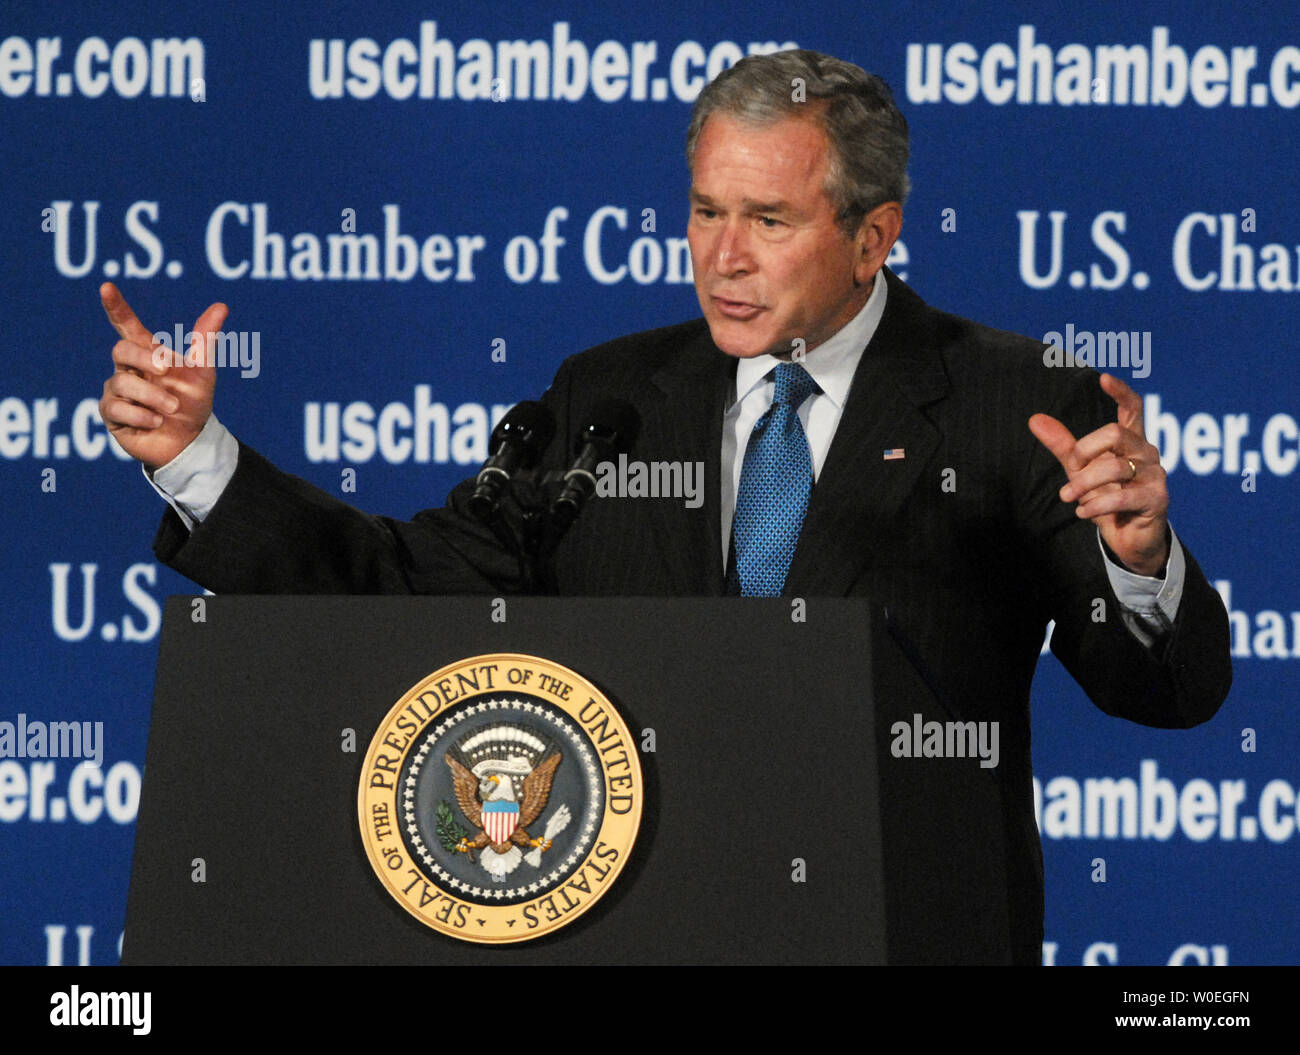 U.S. President George W. Bush speaks about the financial crisis at the U.S. Chamber of Commerce headquarters in Washington on October 17, 2008. (UPI Photo/Alexis C. Glenn) Stock Photo